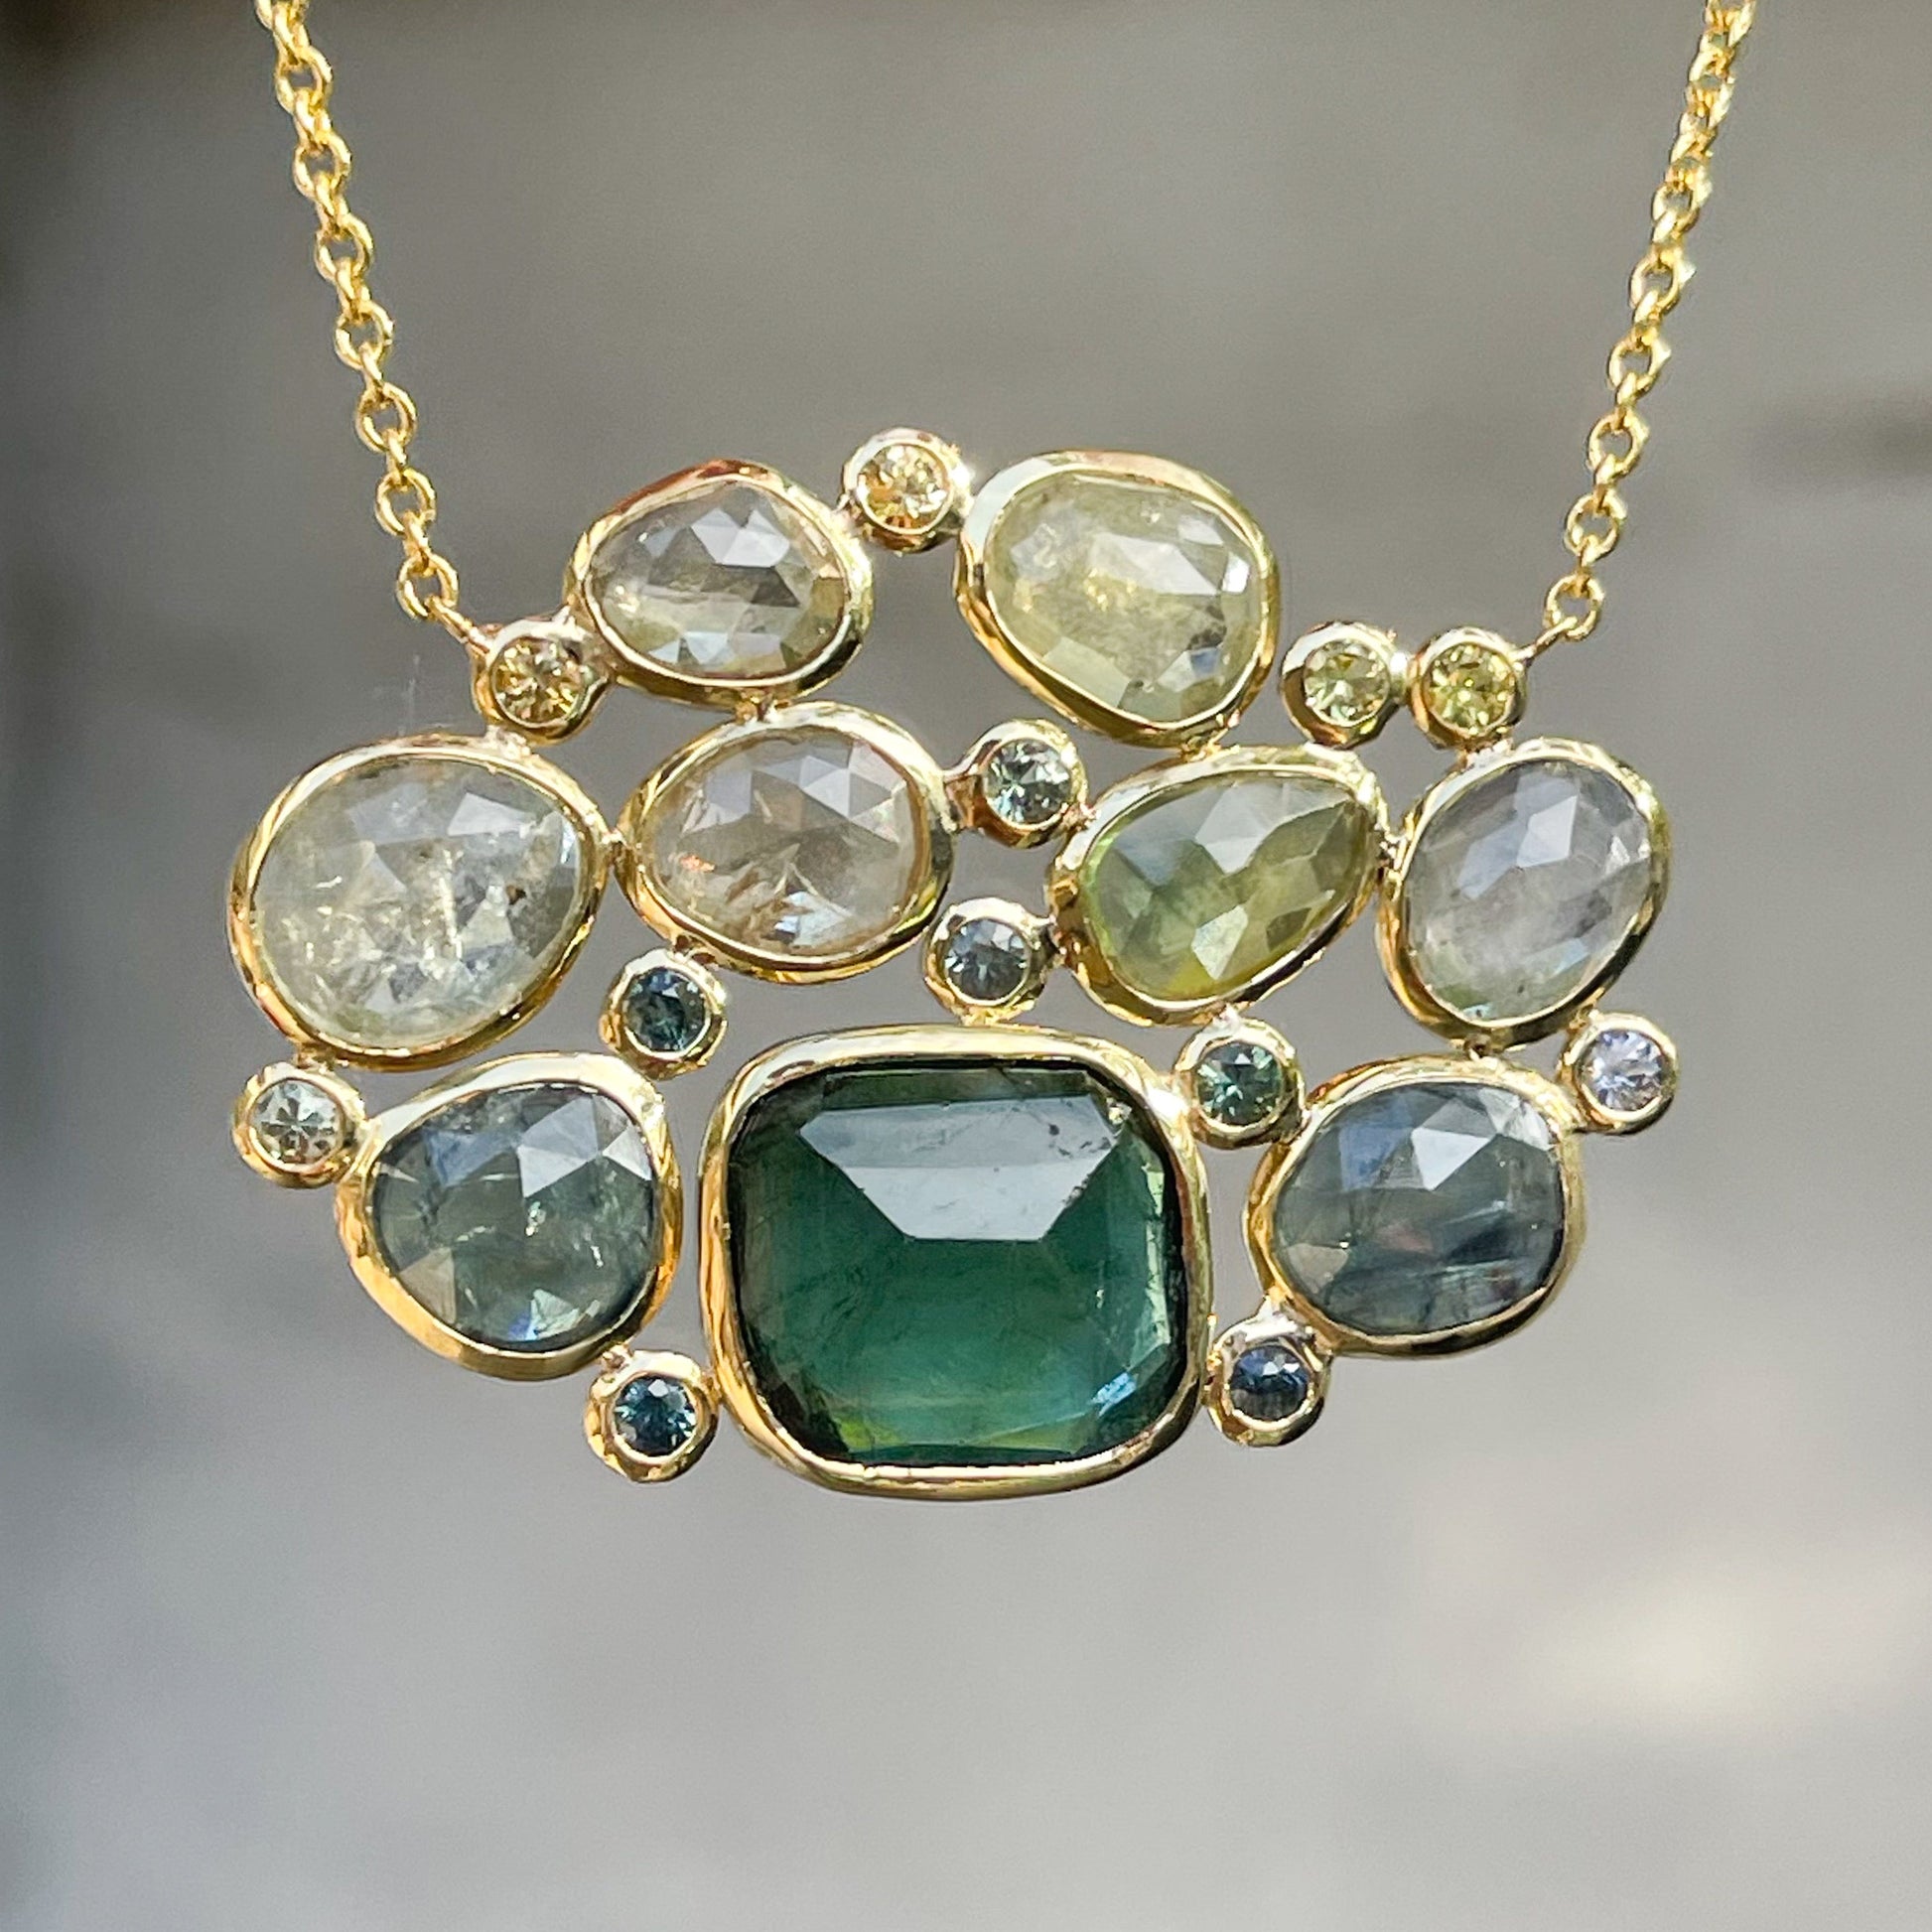  A Tourmaline and Sapphire Necklace by NIXIN Jewelry with rose cut gems and brilliant cut sapphires.